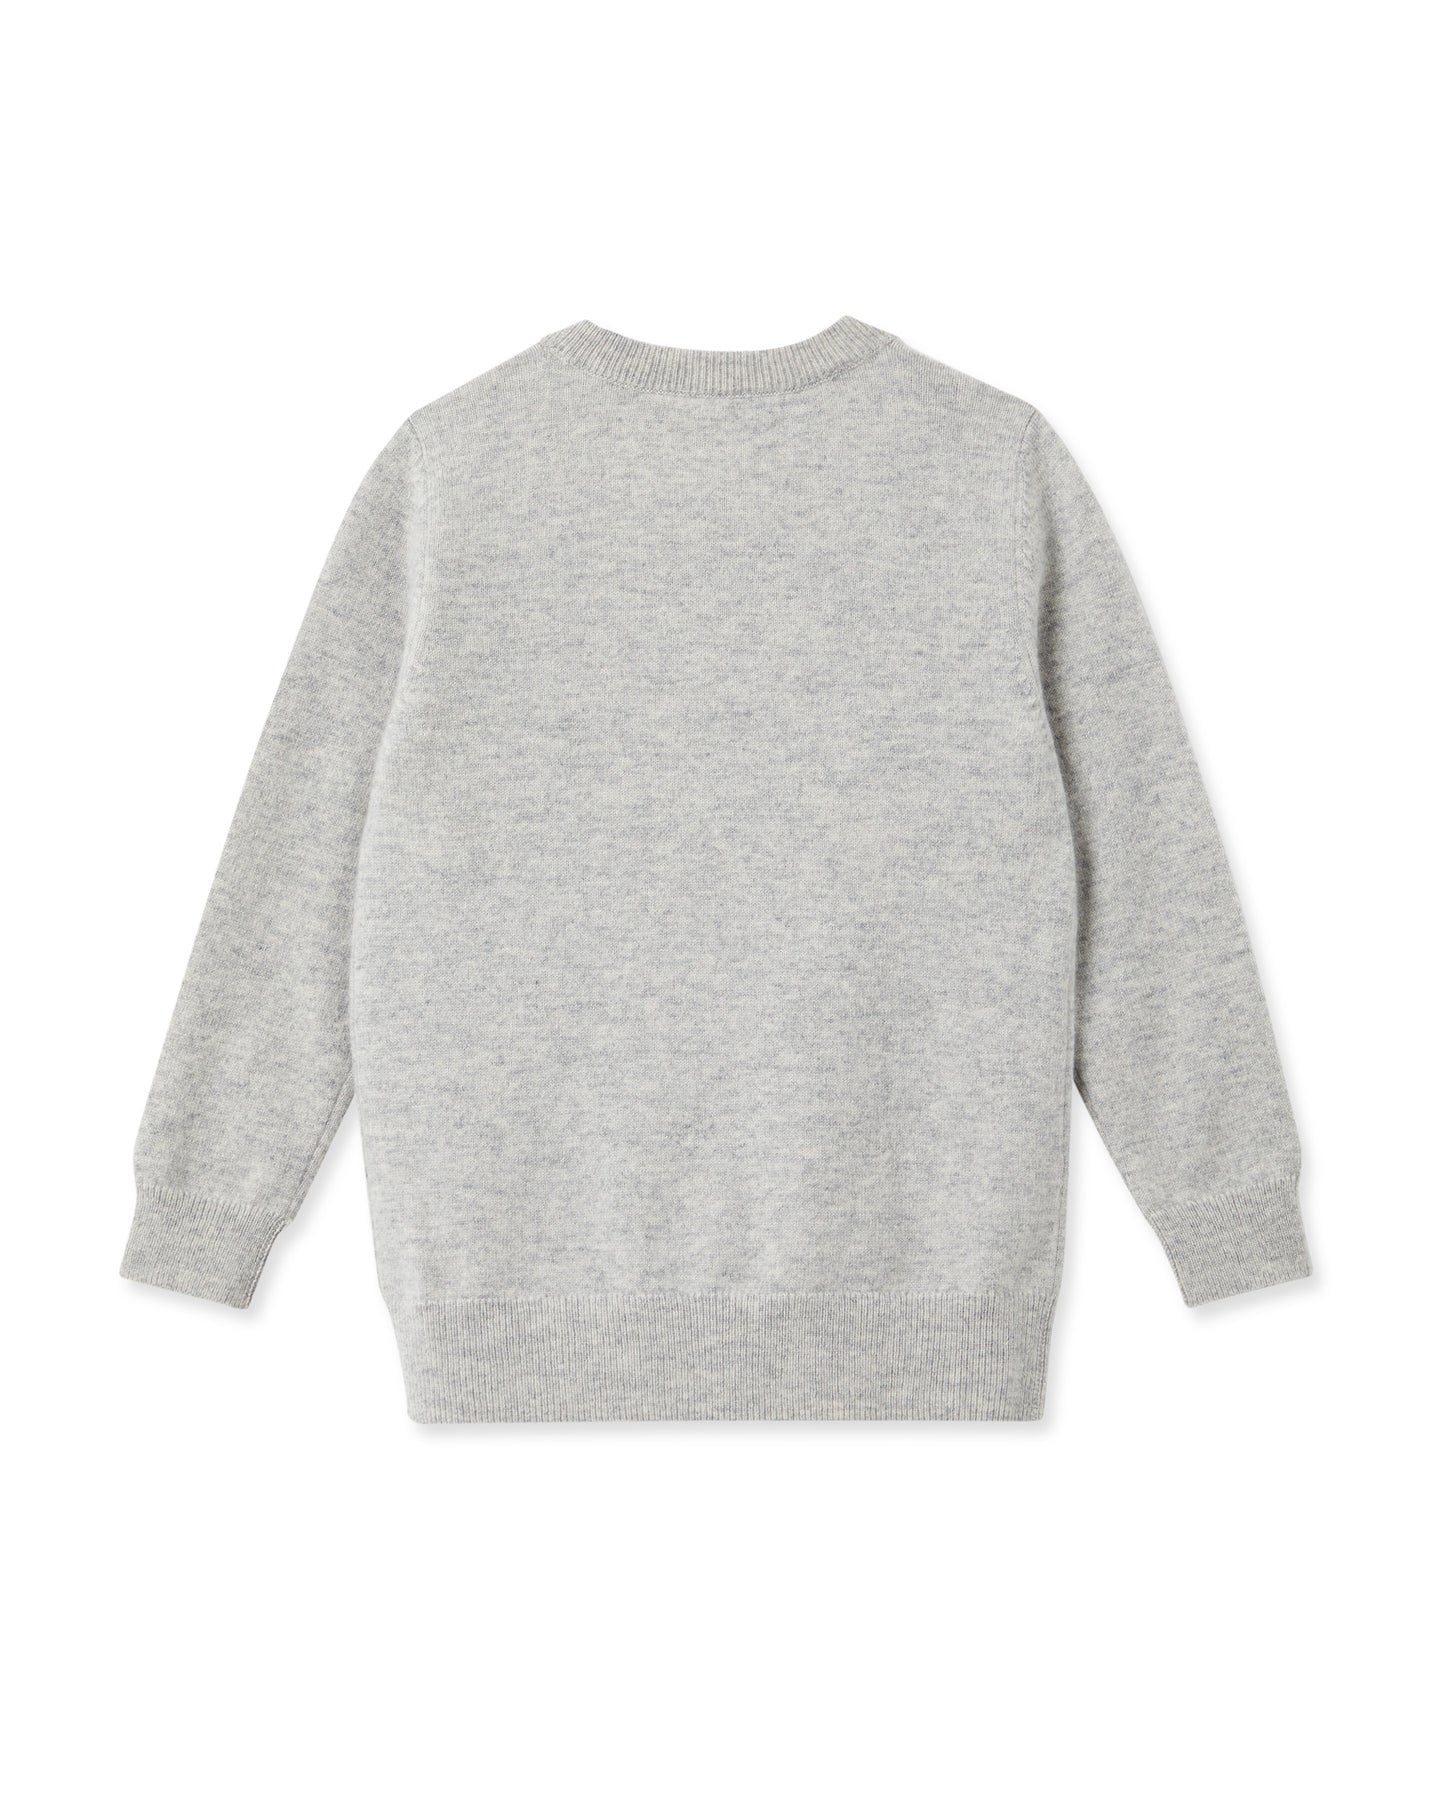 N.Peal Boys Round Neck Cashmere Sweater Fumo Grey New Ivory White